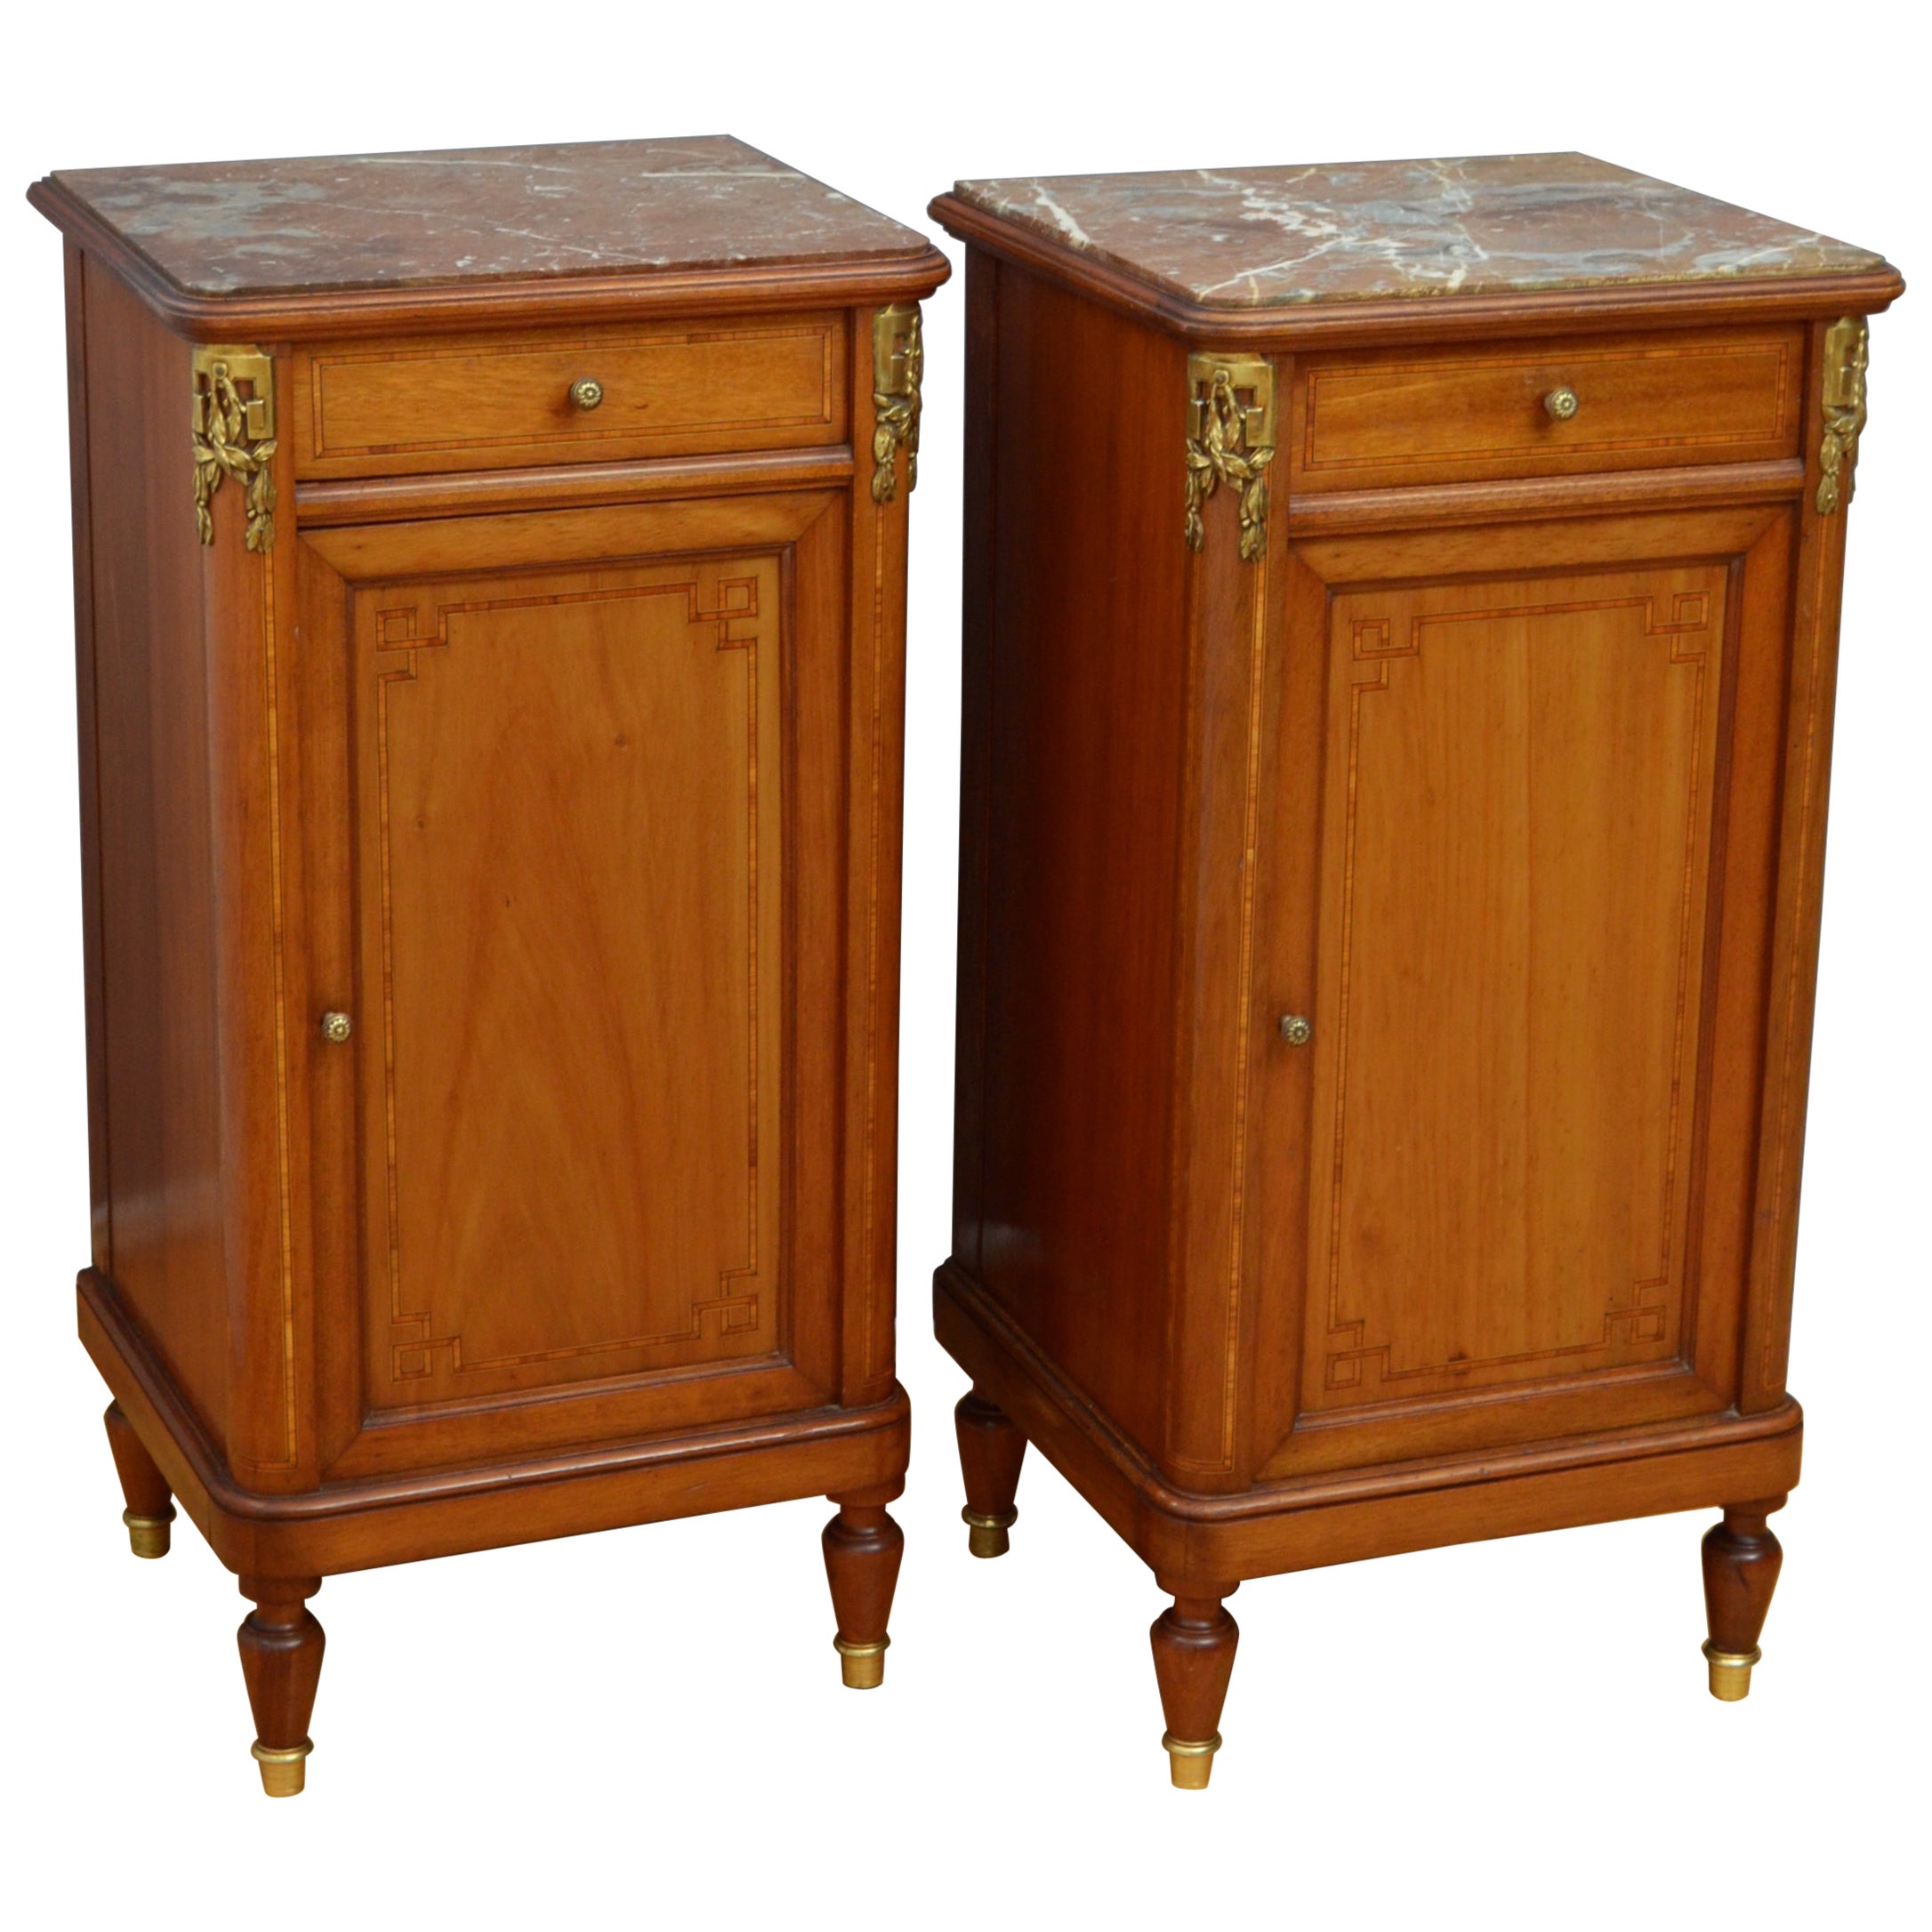 Pair of Turn of the Century Bedside Cabinets in Mahogany